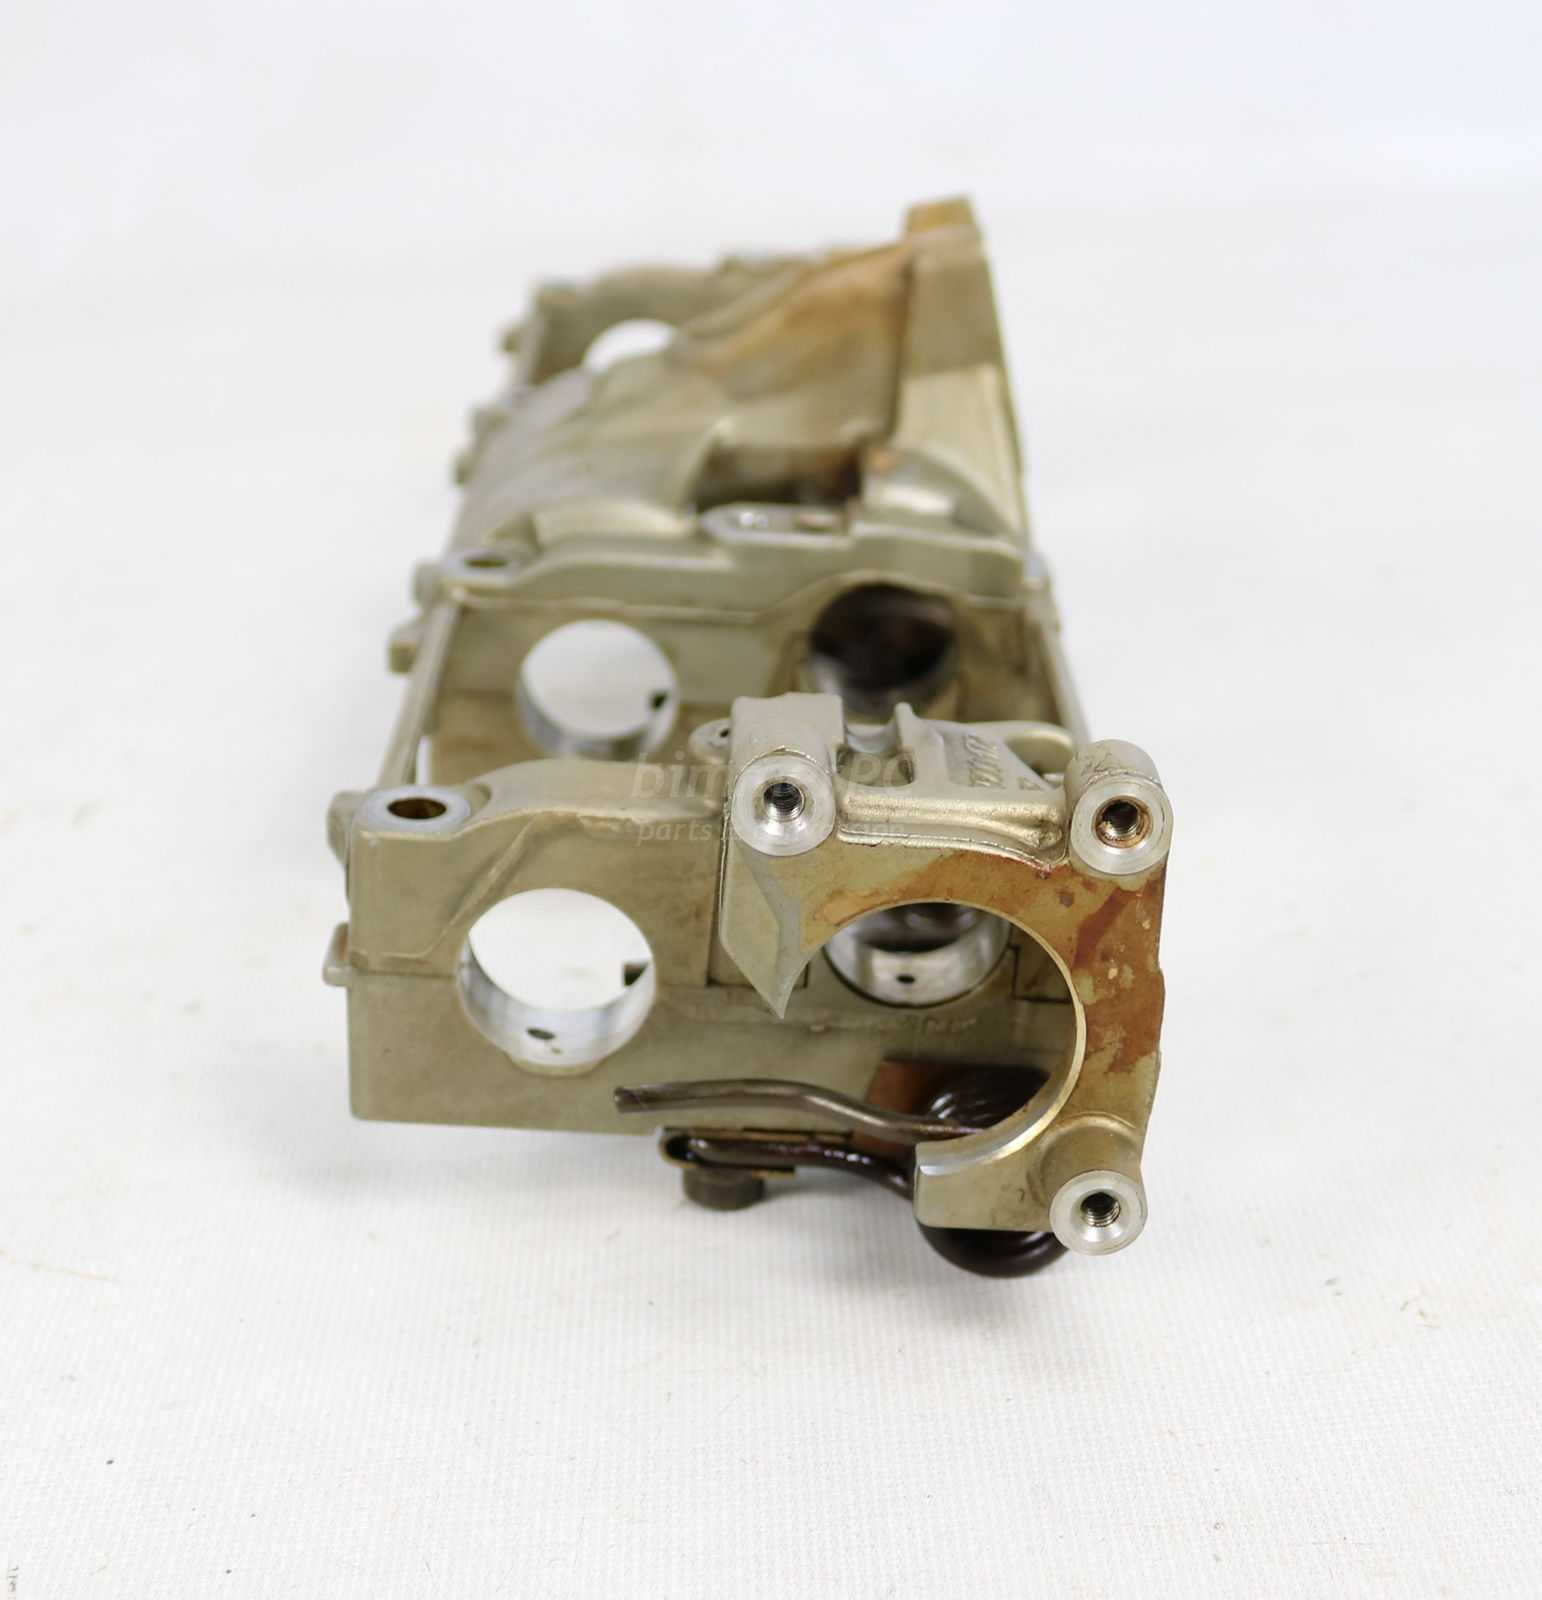 Picture of BMW  Cylinder Head Valvetronic Cam Tray Carrier N62n V8 Bank 2 Cyl 5-8 E60 E63 E64 E65 E66 E70 for sale